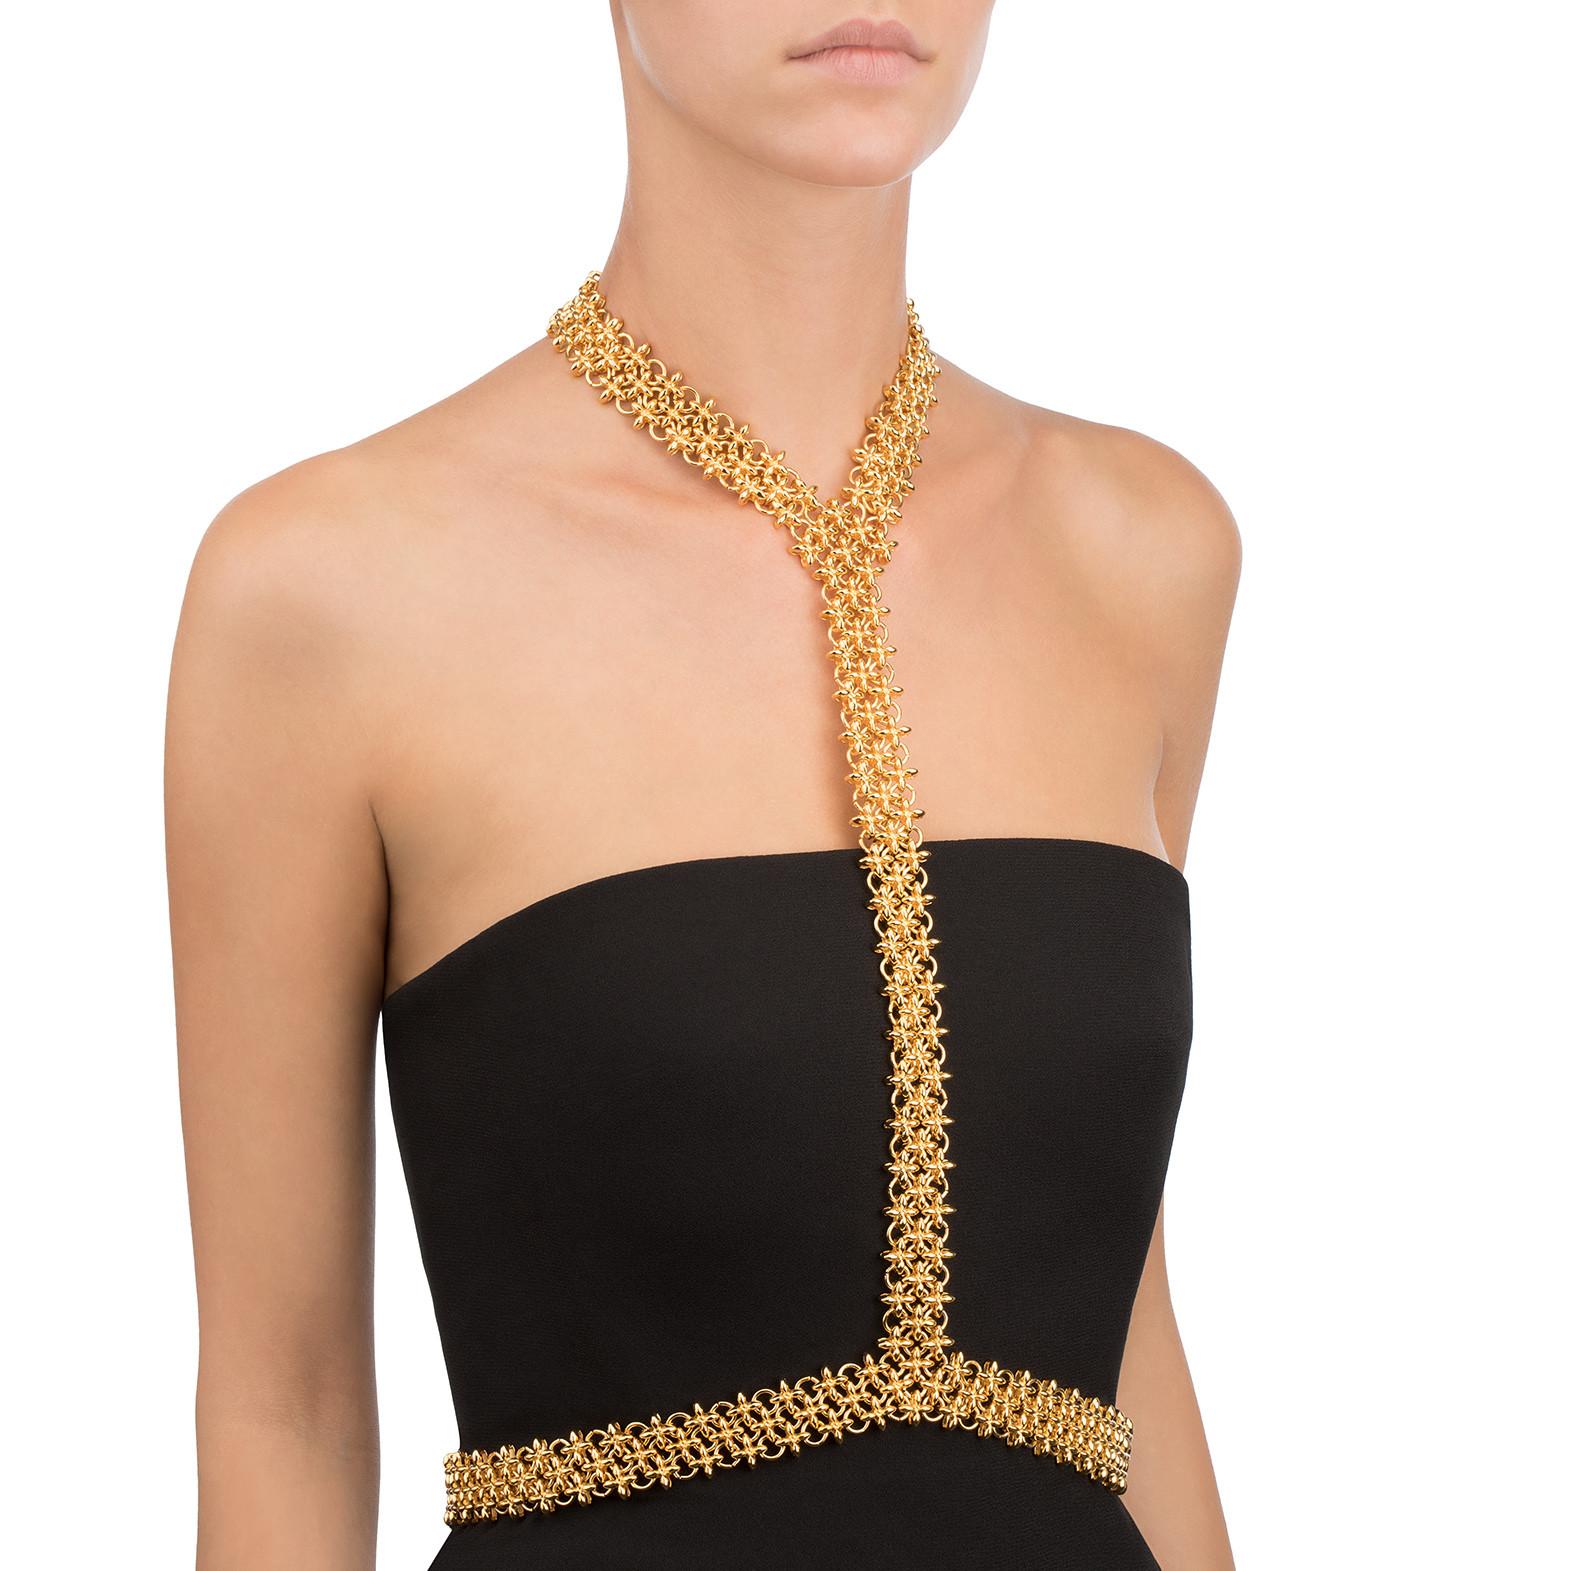 Giuseppe Zanotti NEW Gold Metal Braided 2 in 1 Evening Choker Necklace Accessory in Box

Metal 
Gold tone
Lobster claw closure
Made in Italy
Includes original box
100% authenticity guaranteed

NEWFOUND LUXURY is the premier luxury fashion dealer on